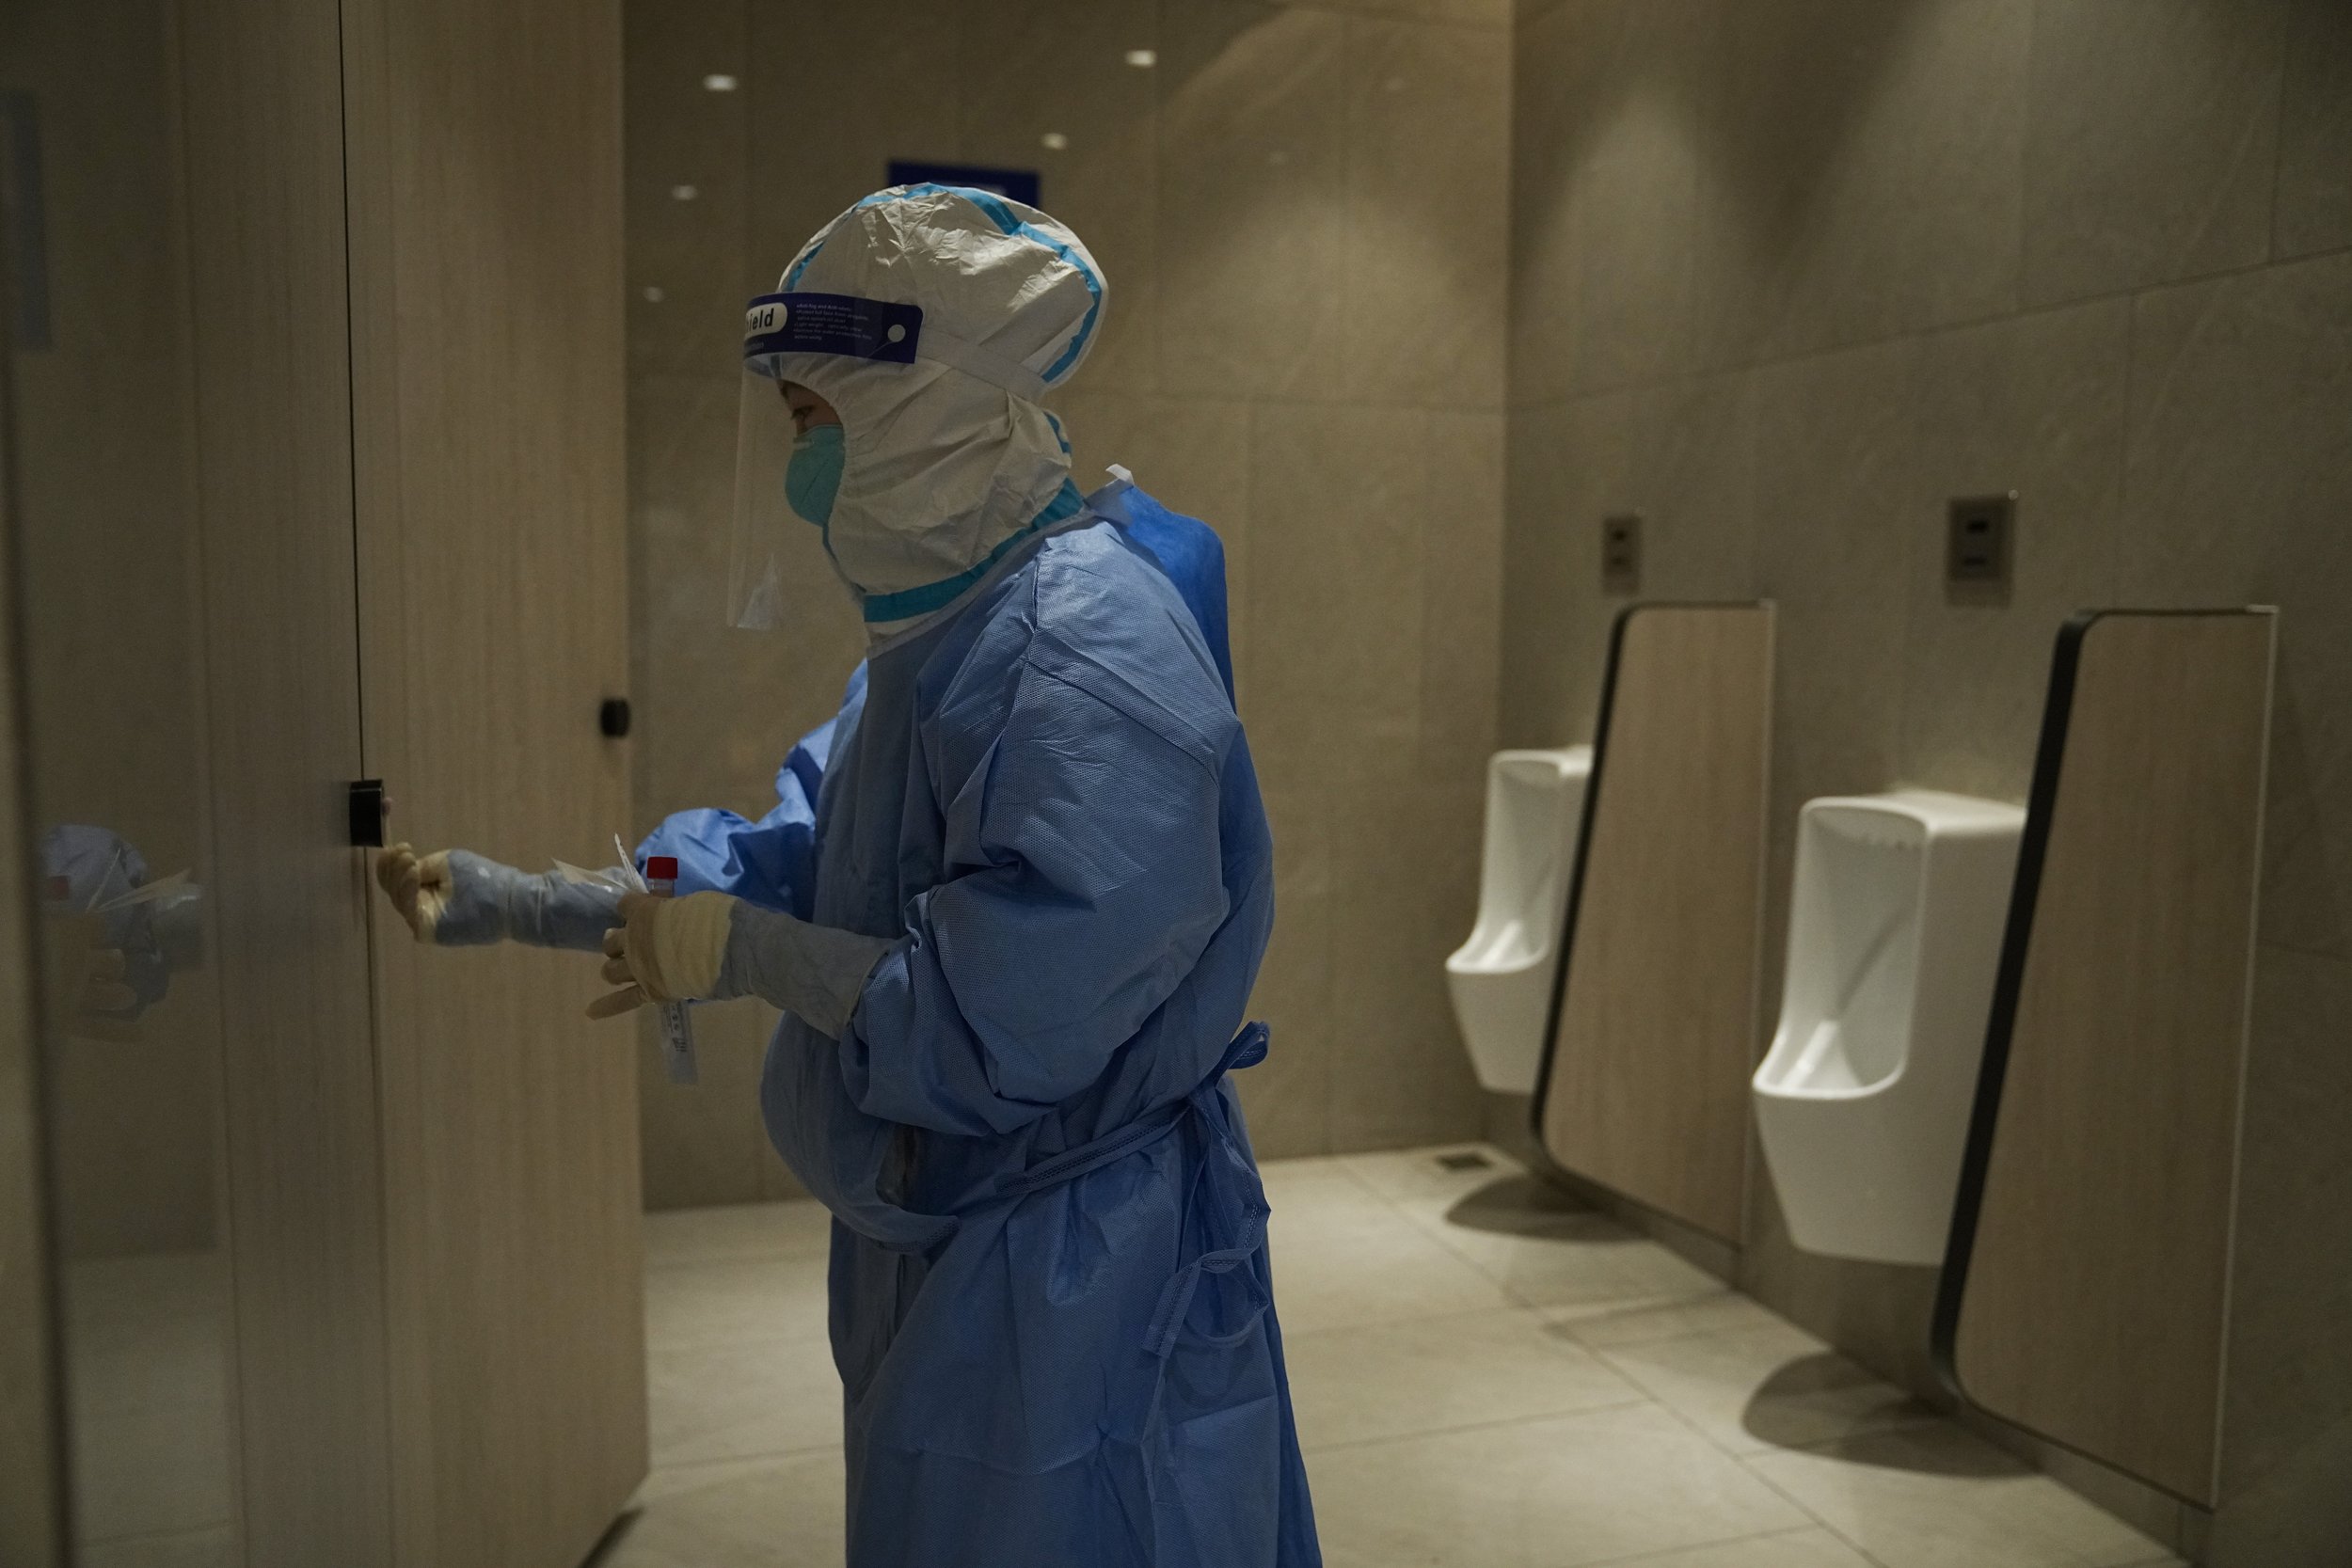  A medical worker collects a sample in a men's restroom for COVID testing in the main media center at the 2022 Winter Olympics, Friday, Feb. 11, 2022, in Beijing. (AP Photo/Jae C. Hong) 